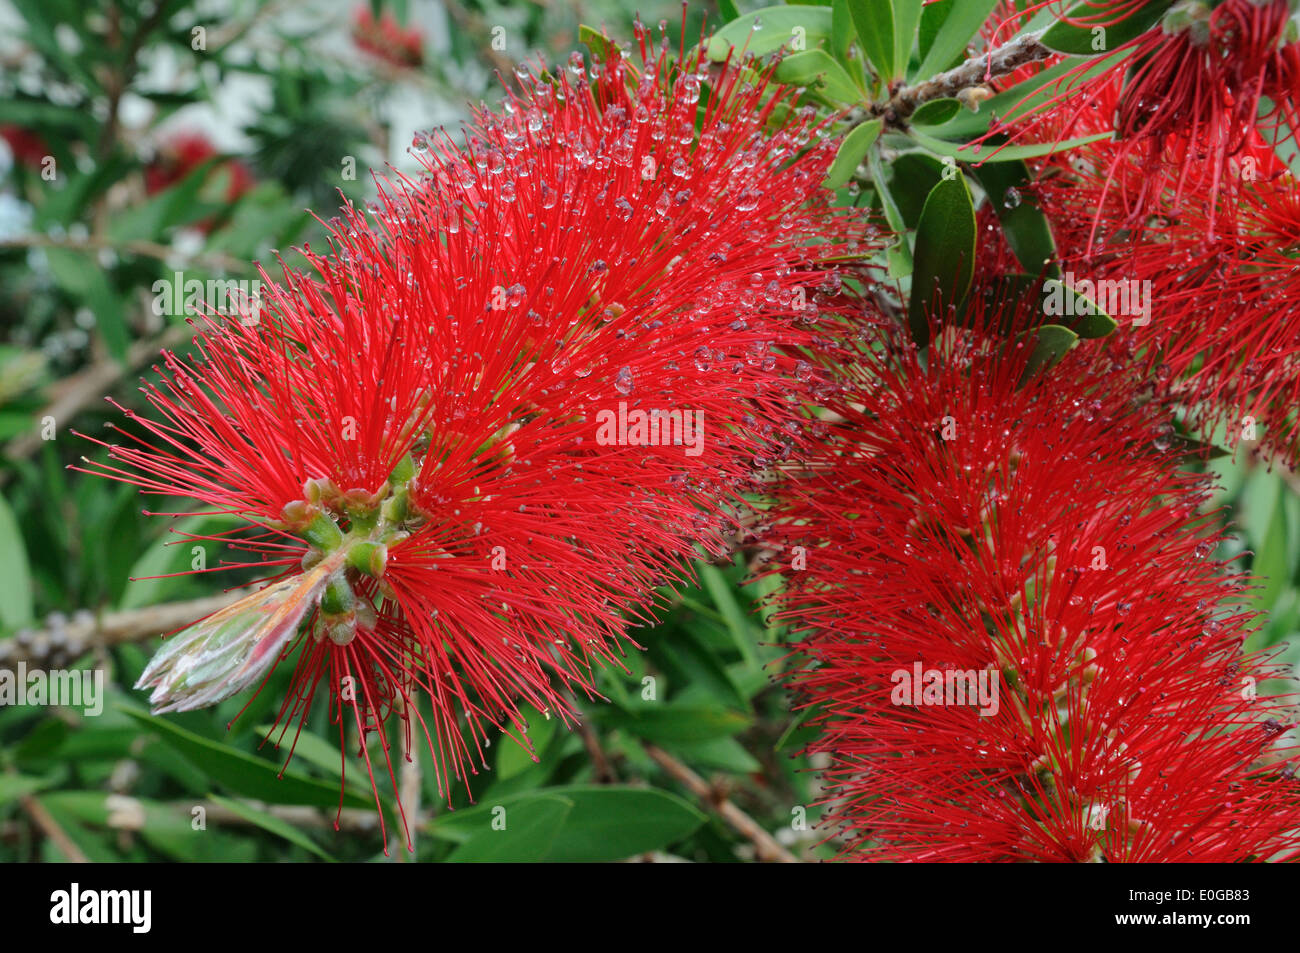 Droplets of water on Red Bottle bush flowers Stock Photo